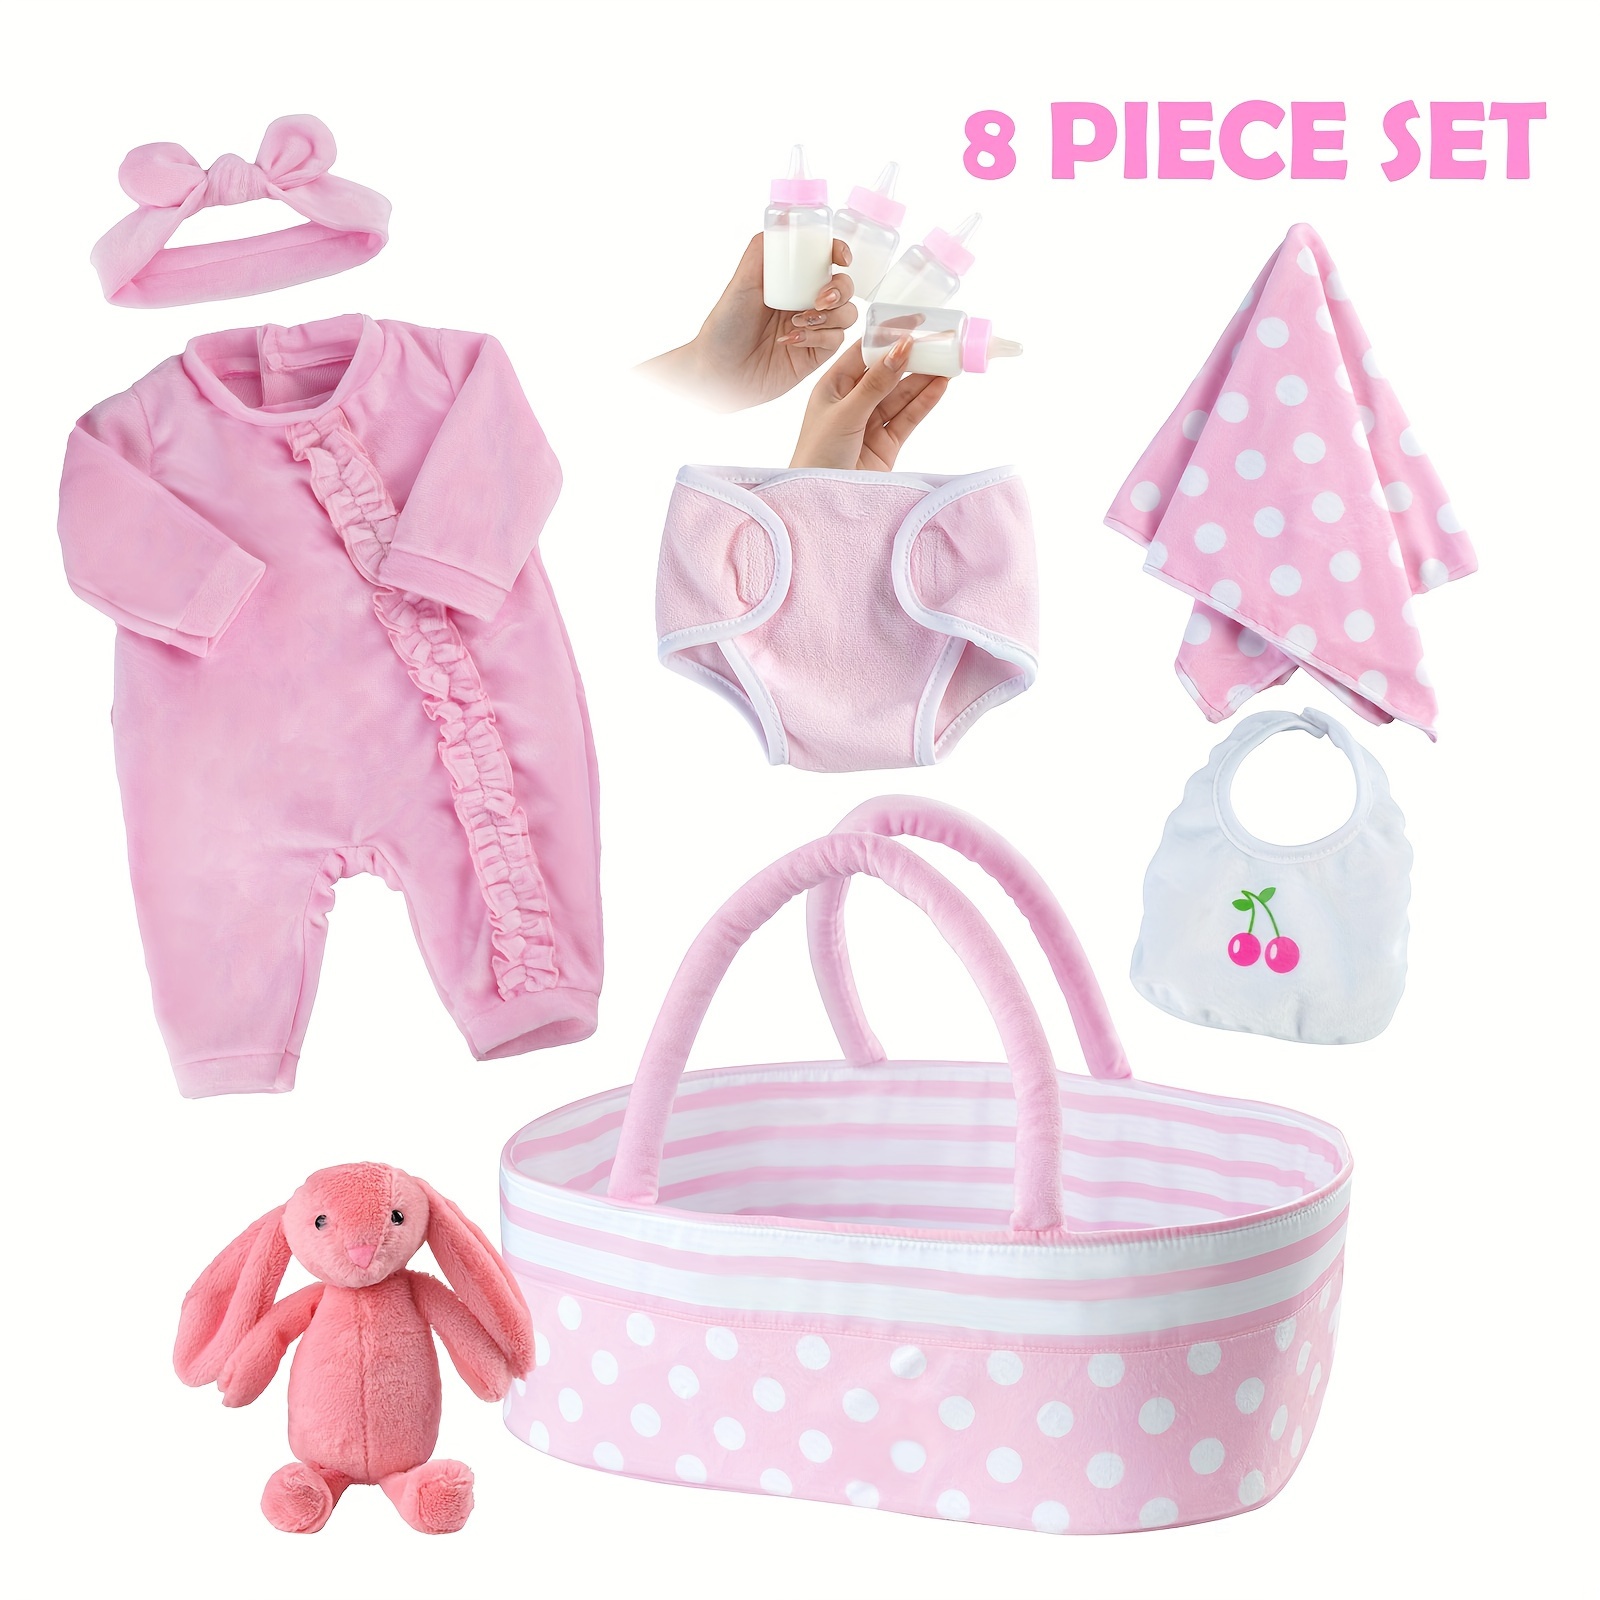 

8pcs Reborn Doll Accessories With Basket For 17-22 In Doll, Clothes Outfit Accessories Fit Reborn Doll, Not Include Doll